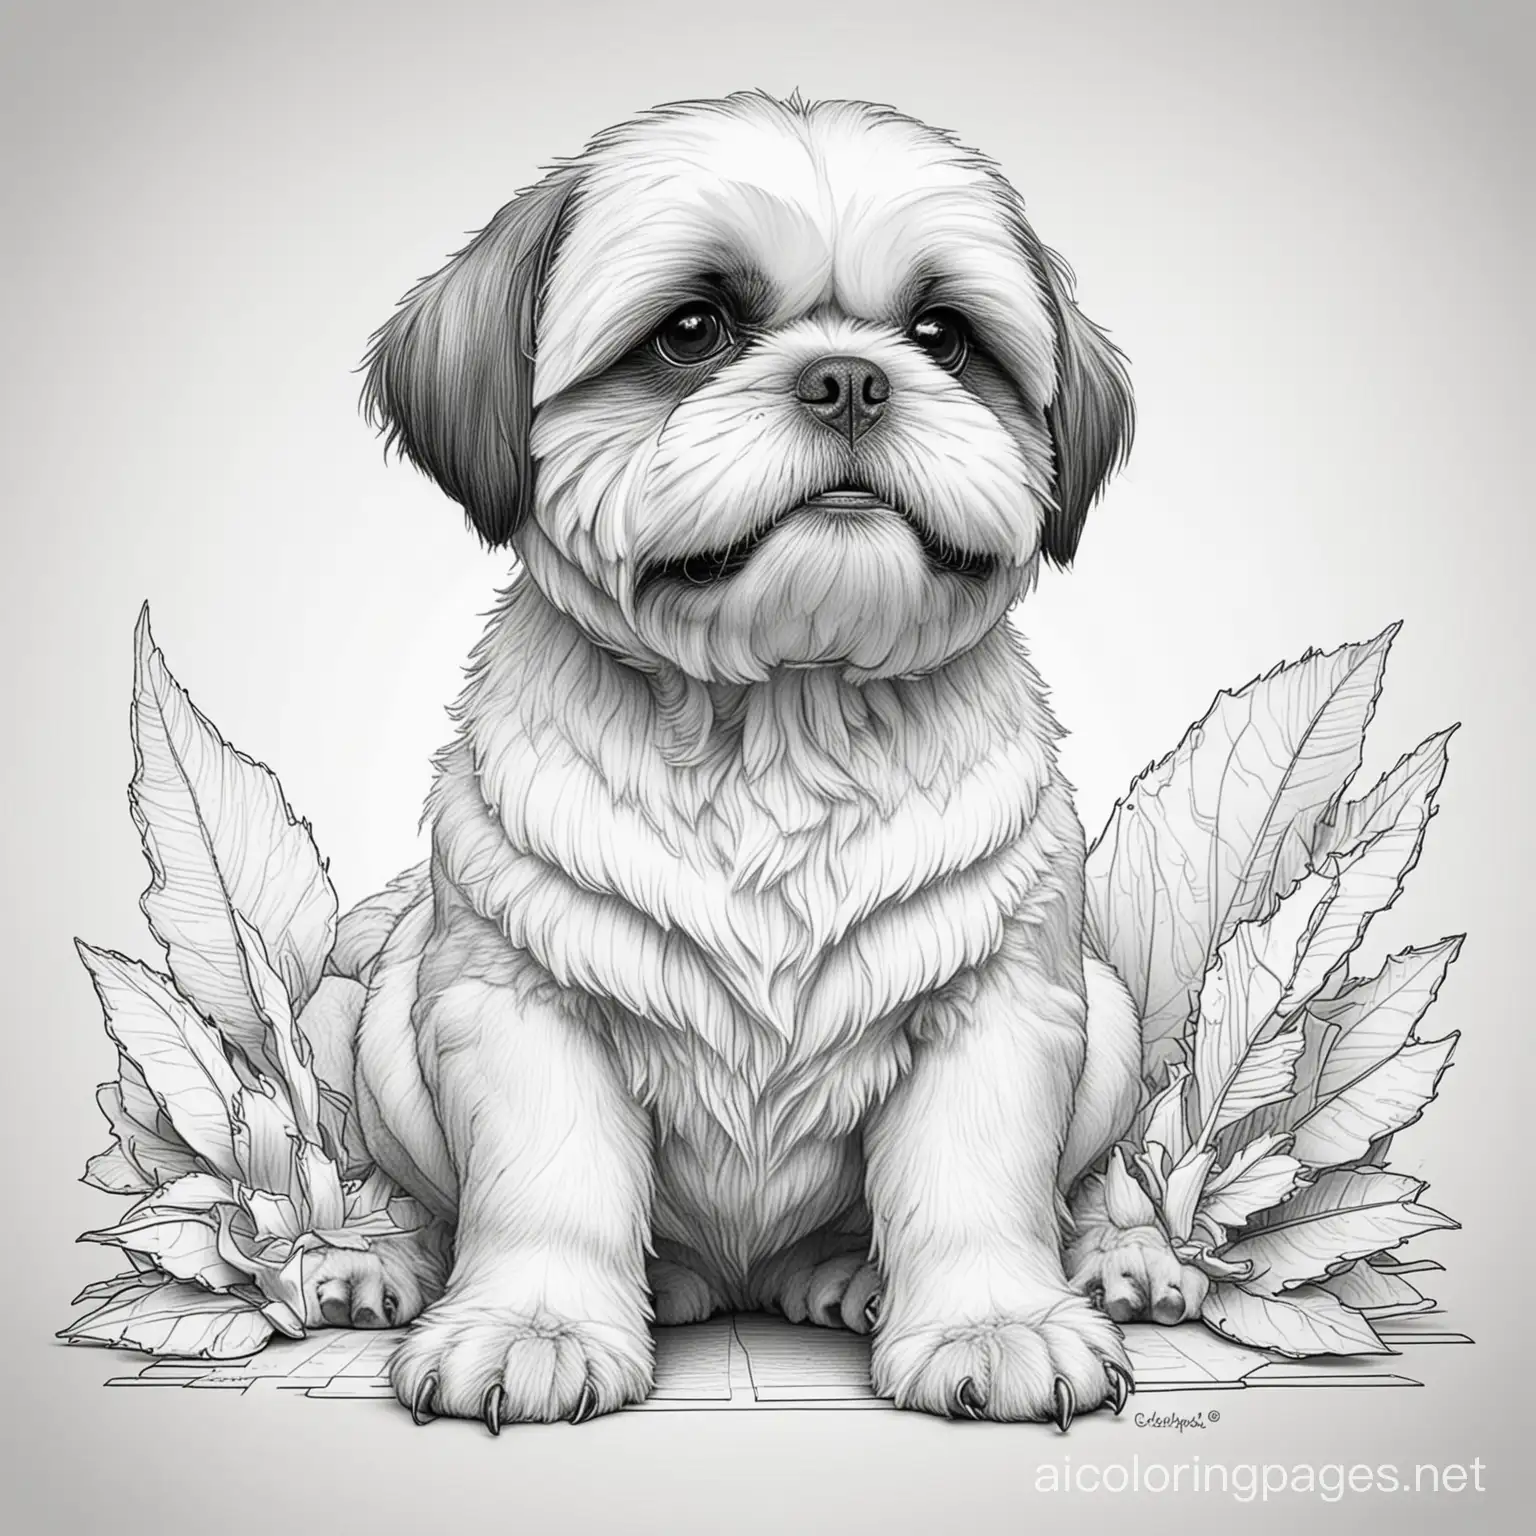 head of a shih tzu attached to the body of a dinosaur, Coloring Page, black and white, line art, white background, Simplicity, Ample White Space. The background of the coloring page is plain white to make it easy for young children to color within the lines. The outlines of all the subjects are easy to distinguish, making it simple for kids to color without too much difficulty